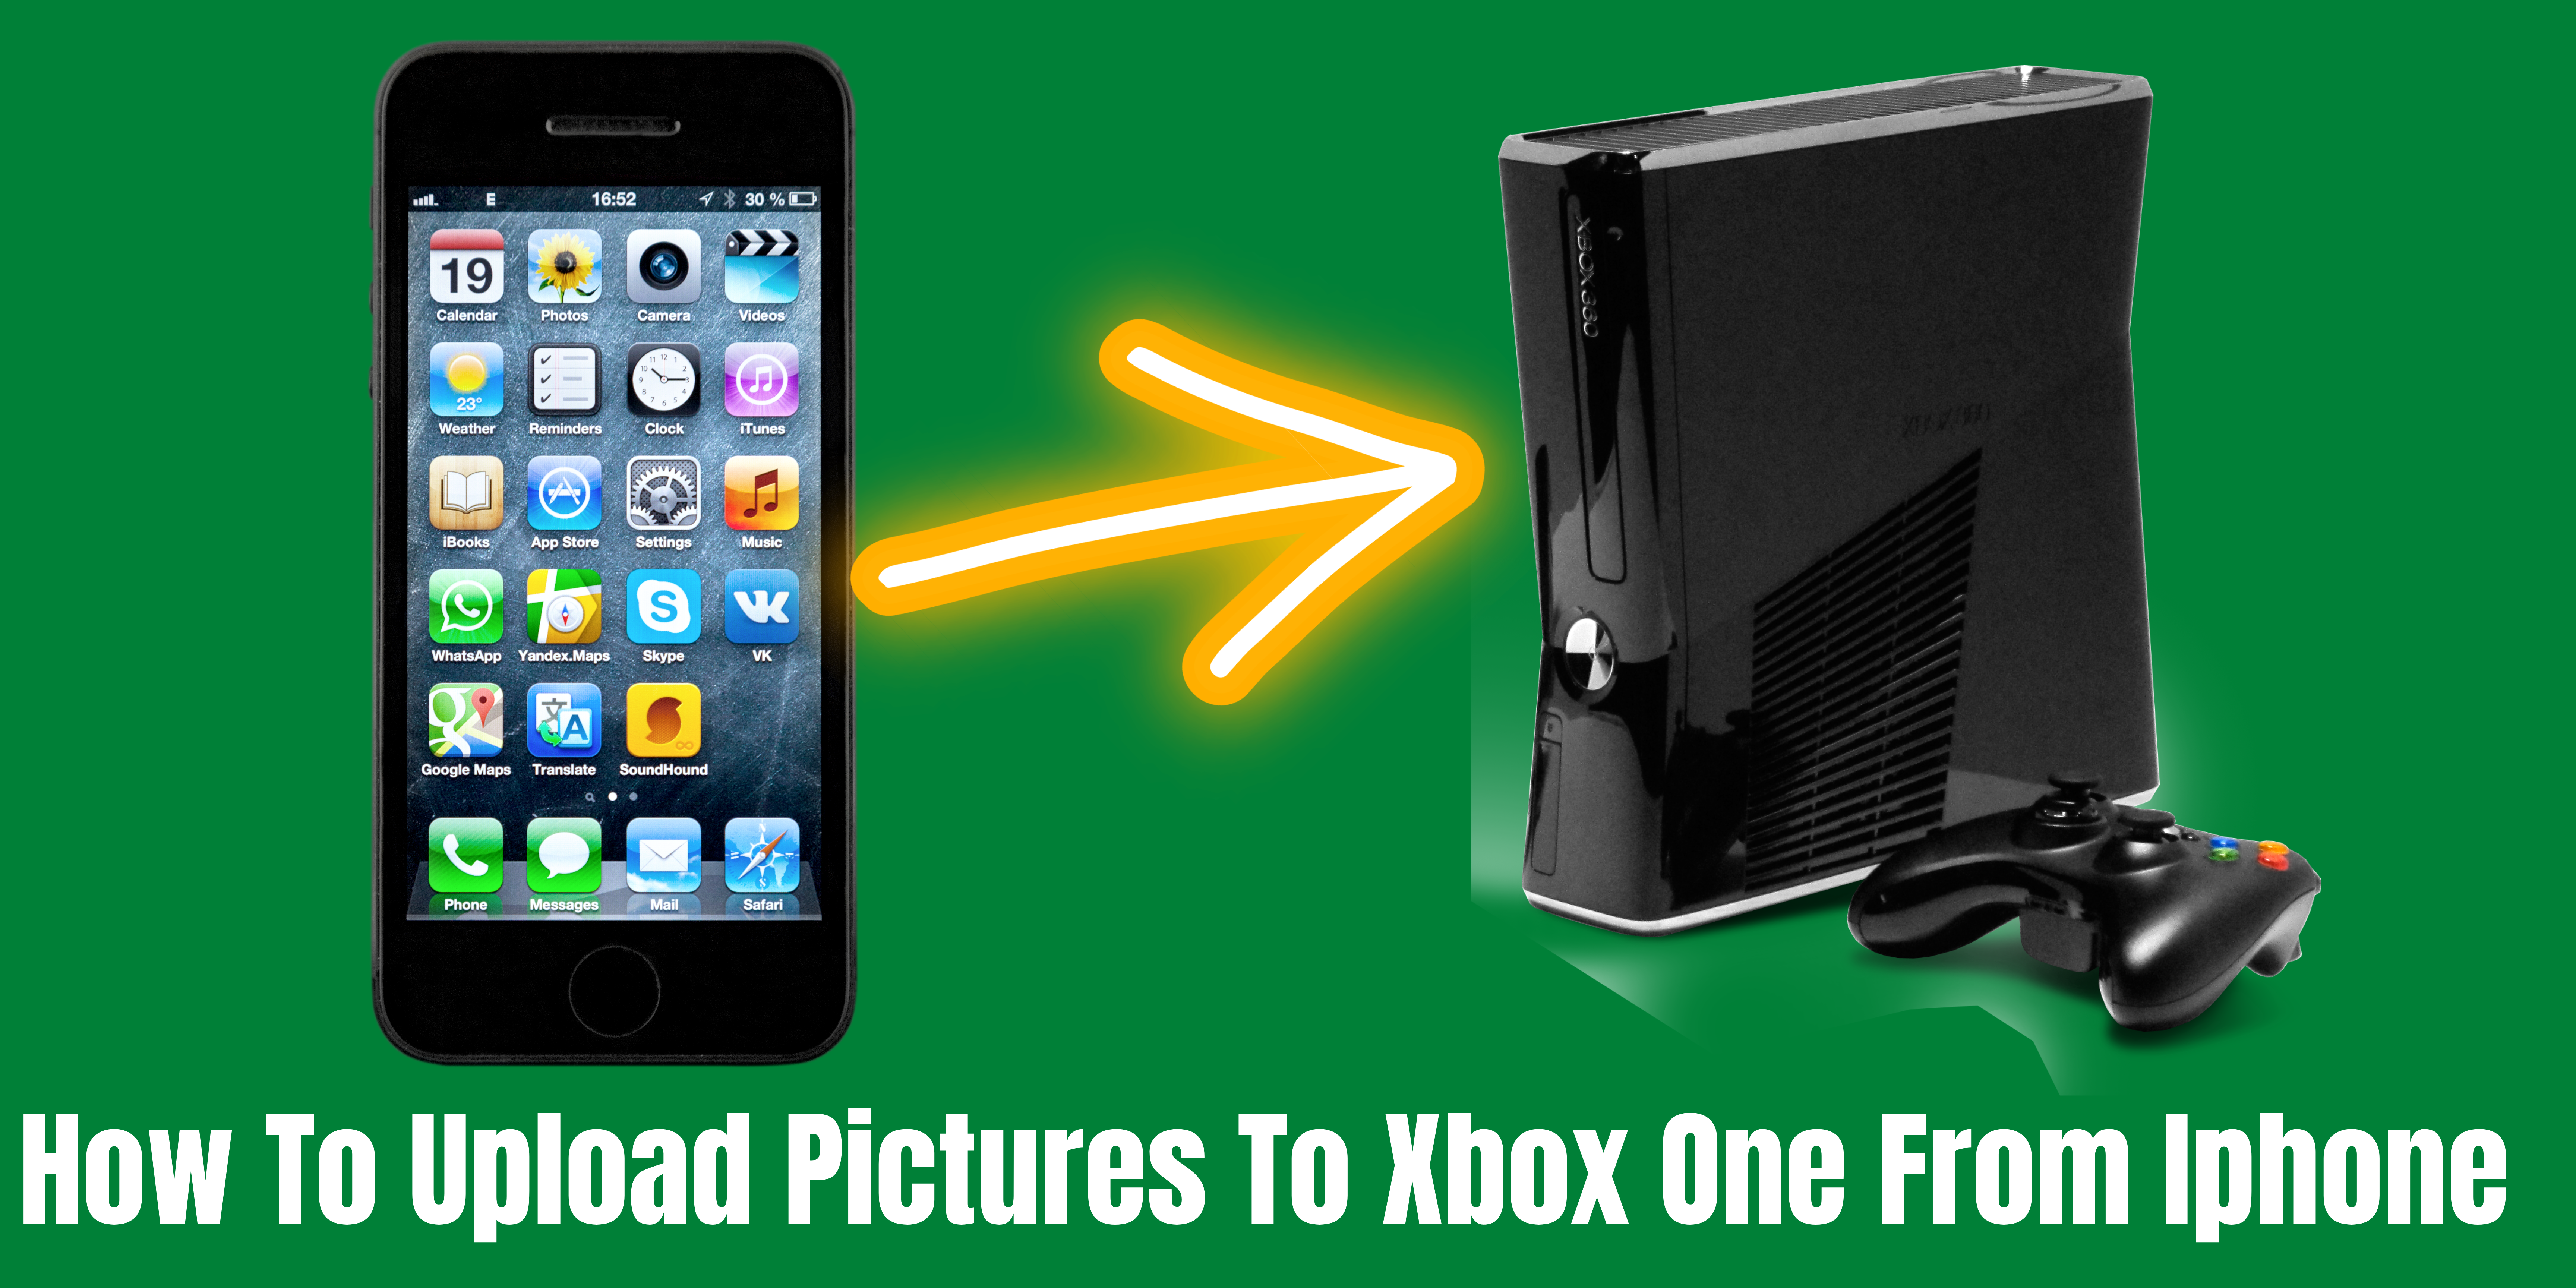 how to upload pictures to Xbox one from iPhone